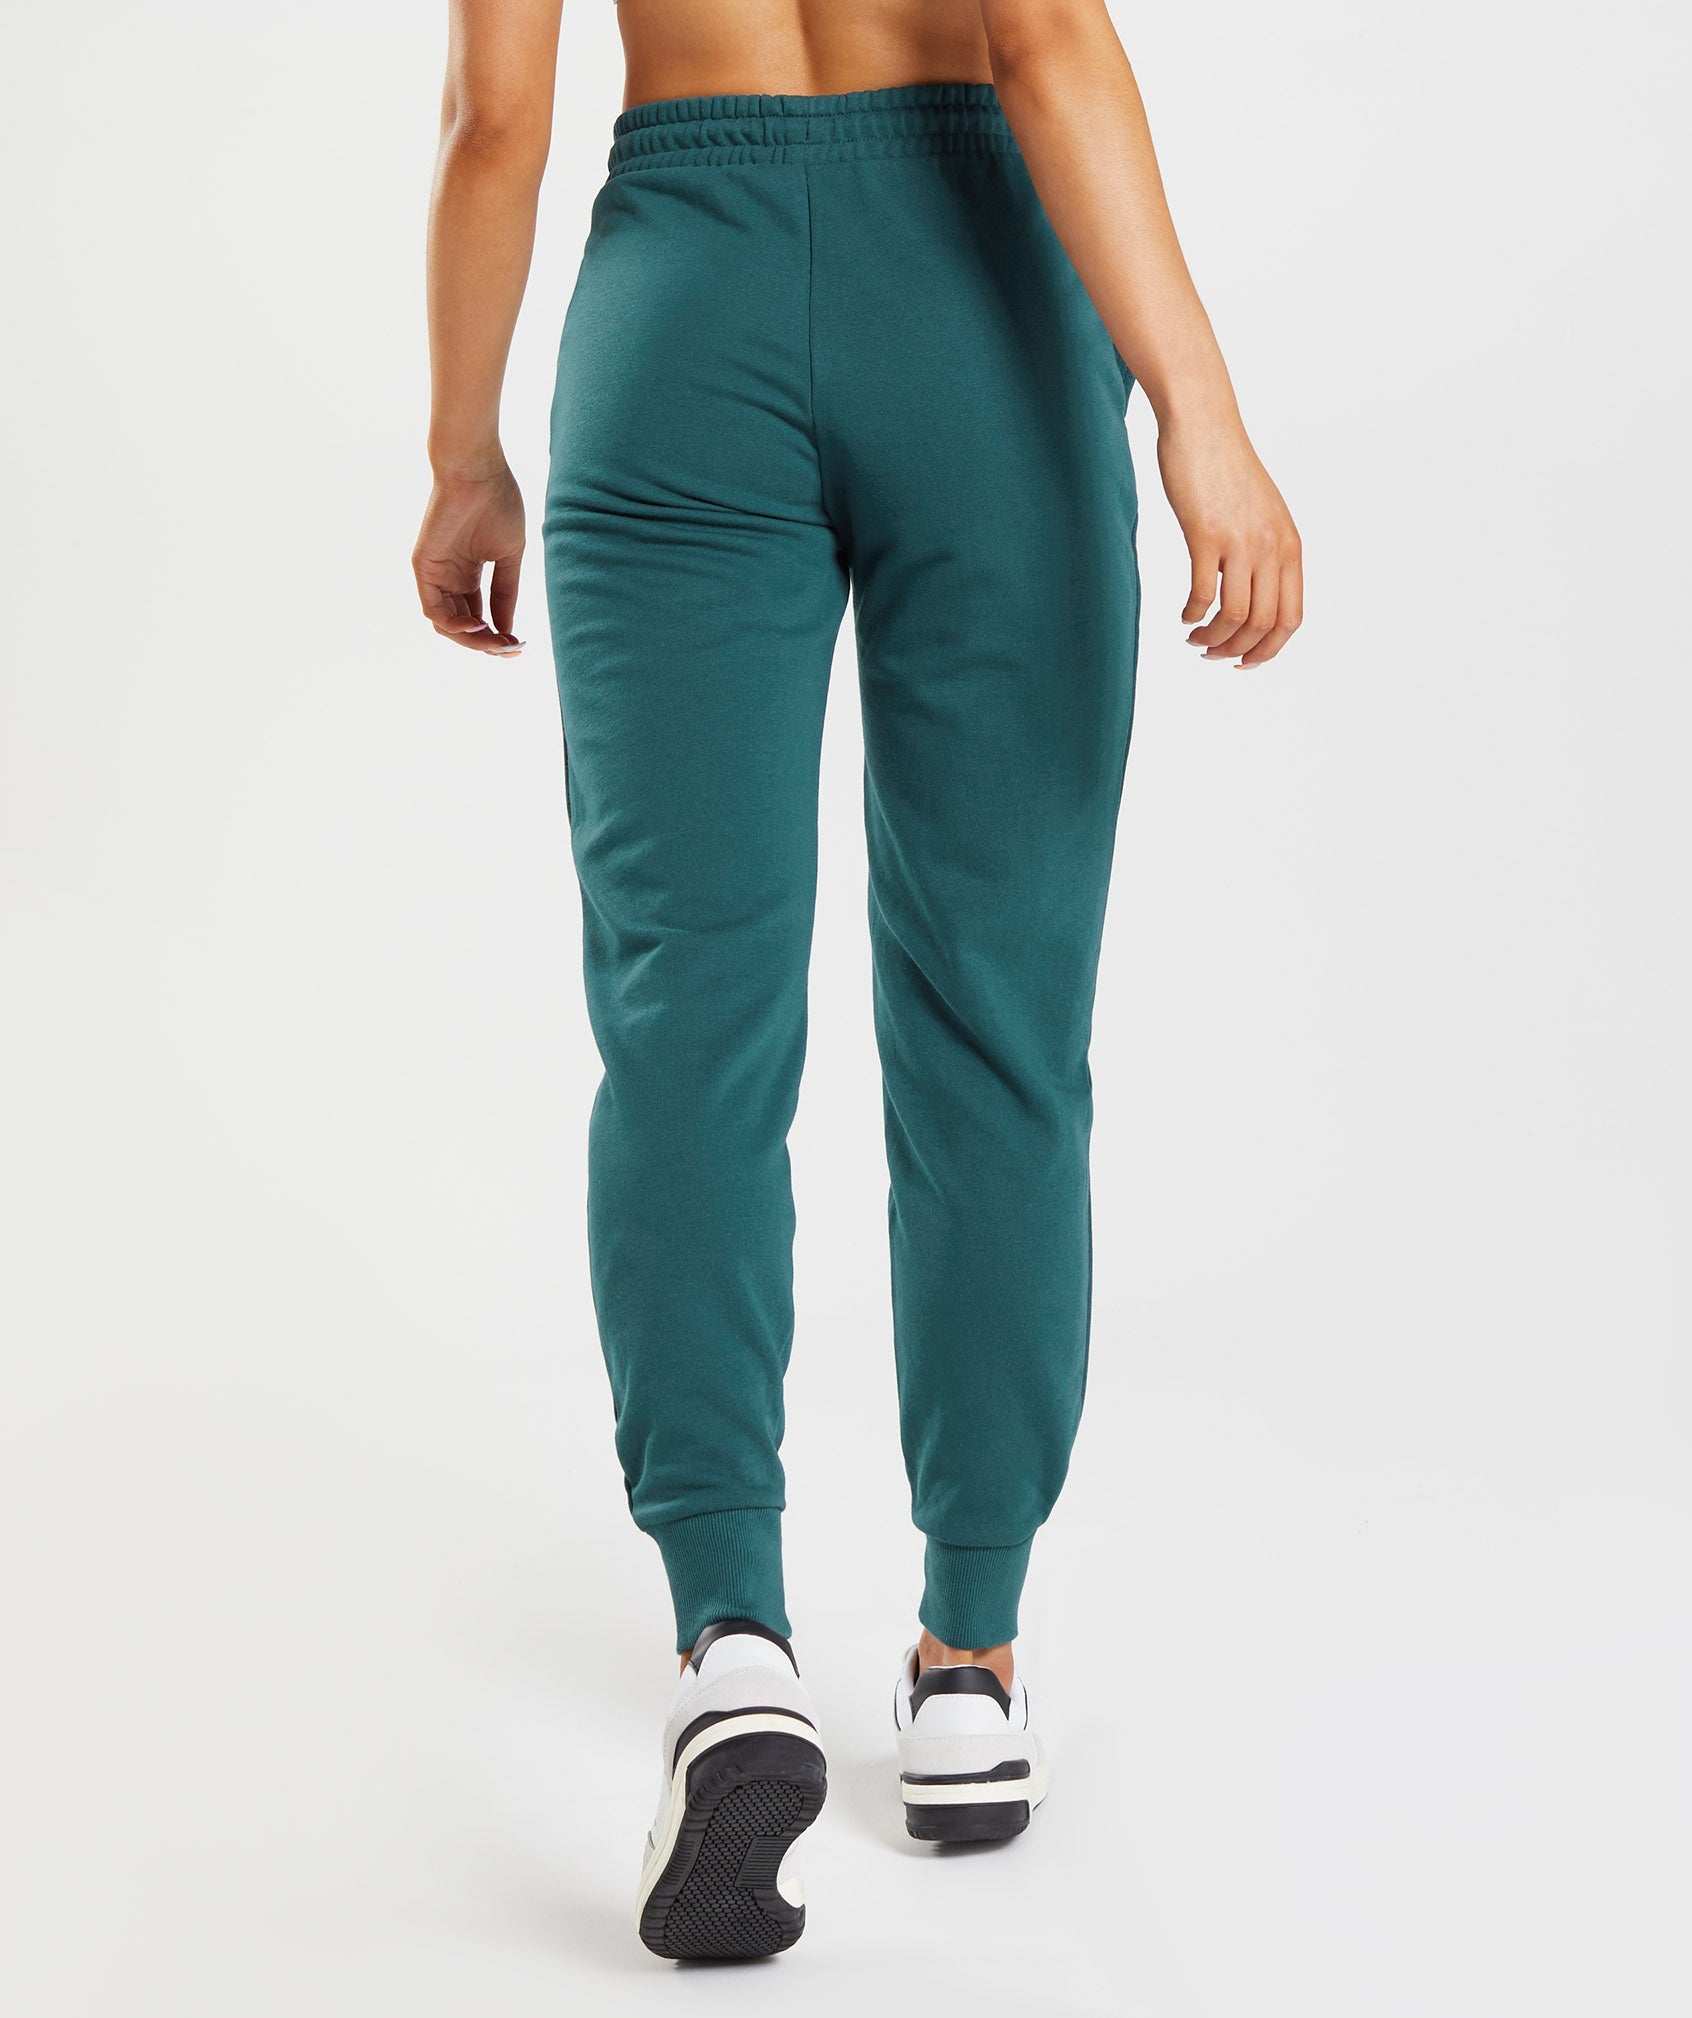 Training Joggers in Winter Teal - view 2